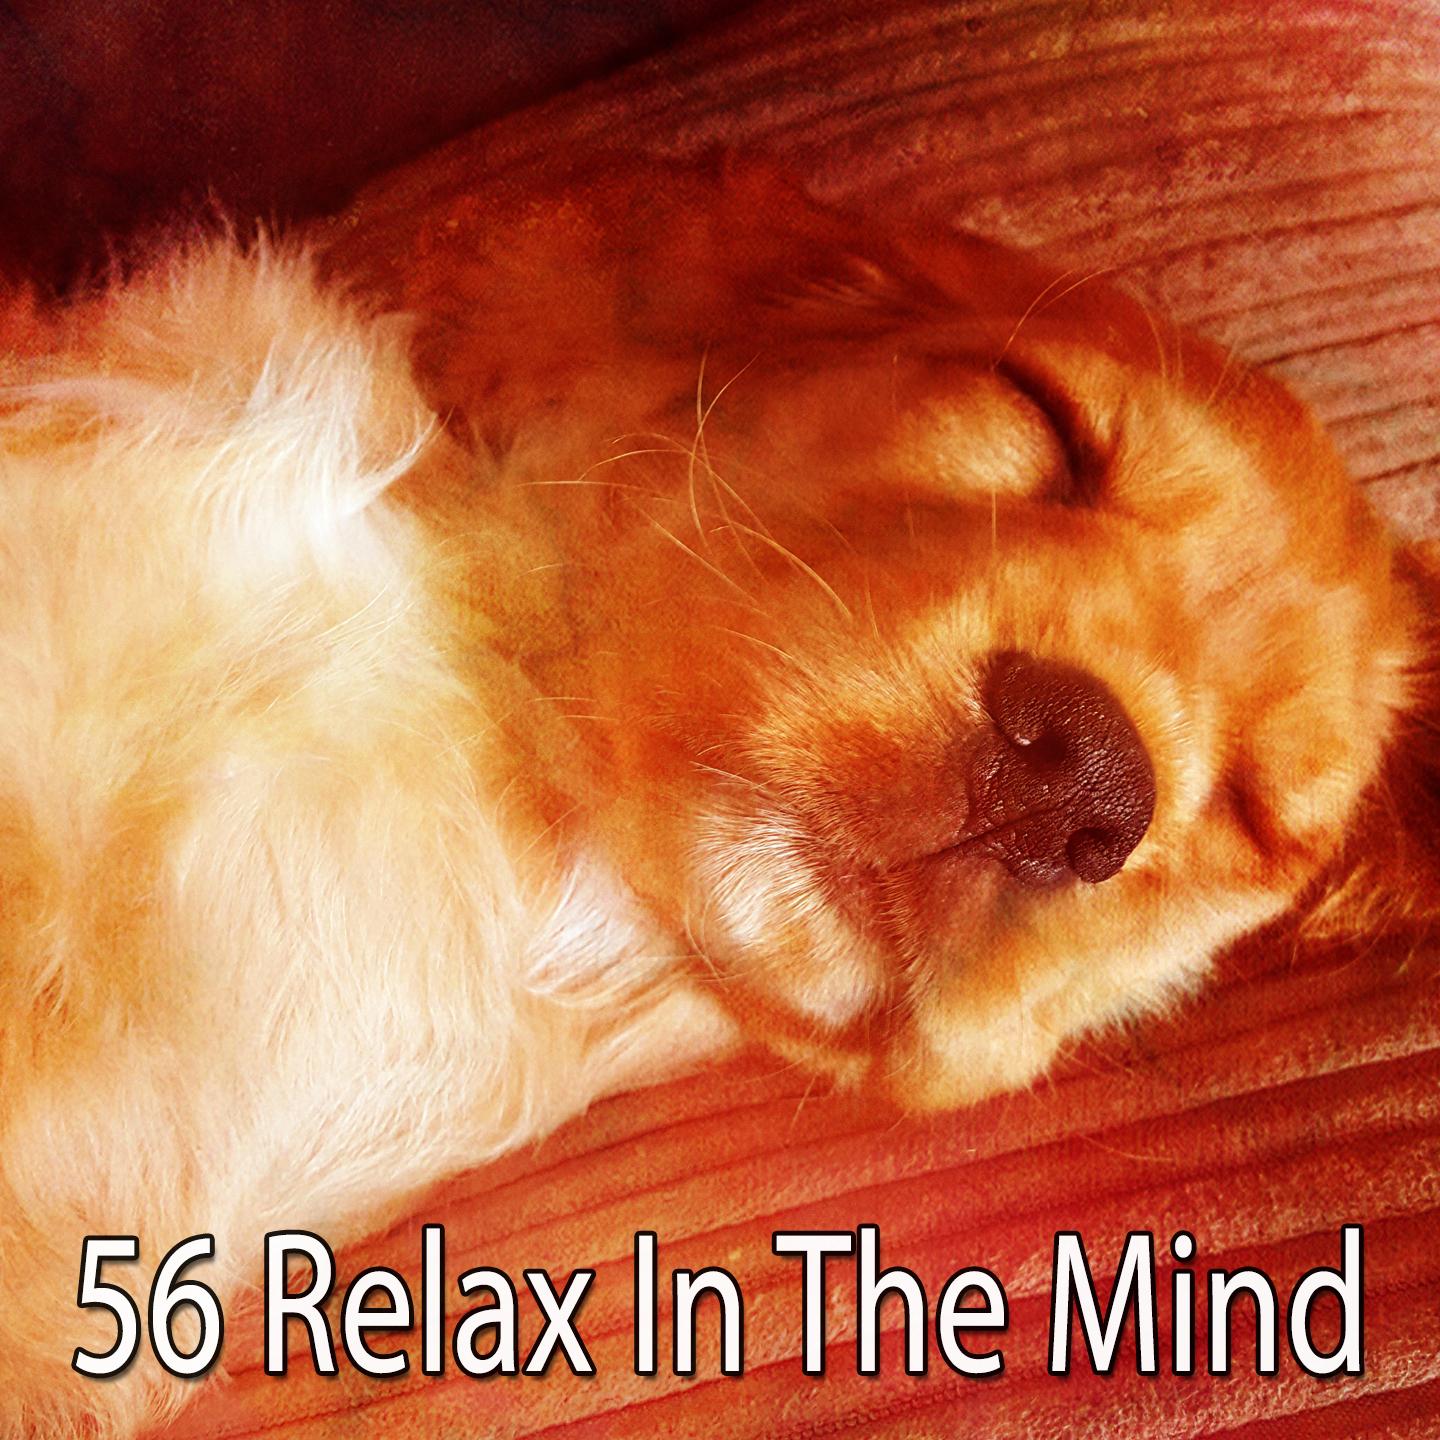 56 Relax in the Mind